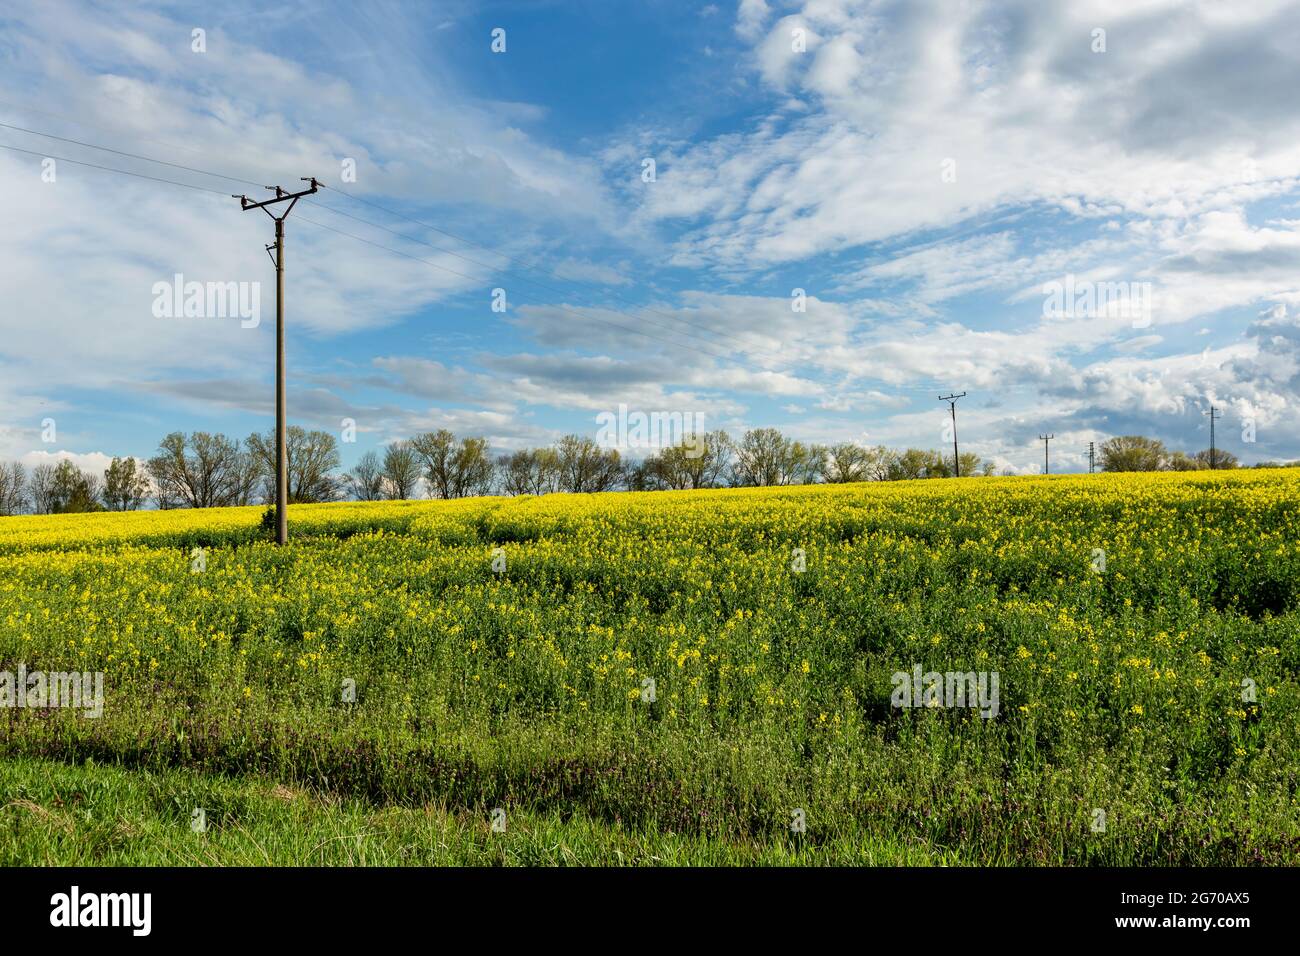 View of rural countryside with yellow rapeseed field, green grass, trees on horizon, electricity poles and lines. Sunny spring day with blue sky. Stock Photo